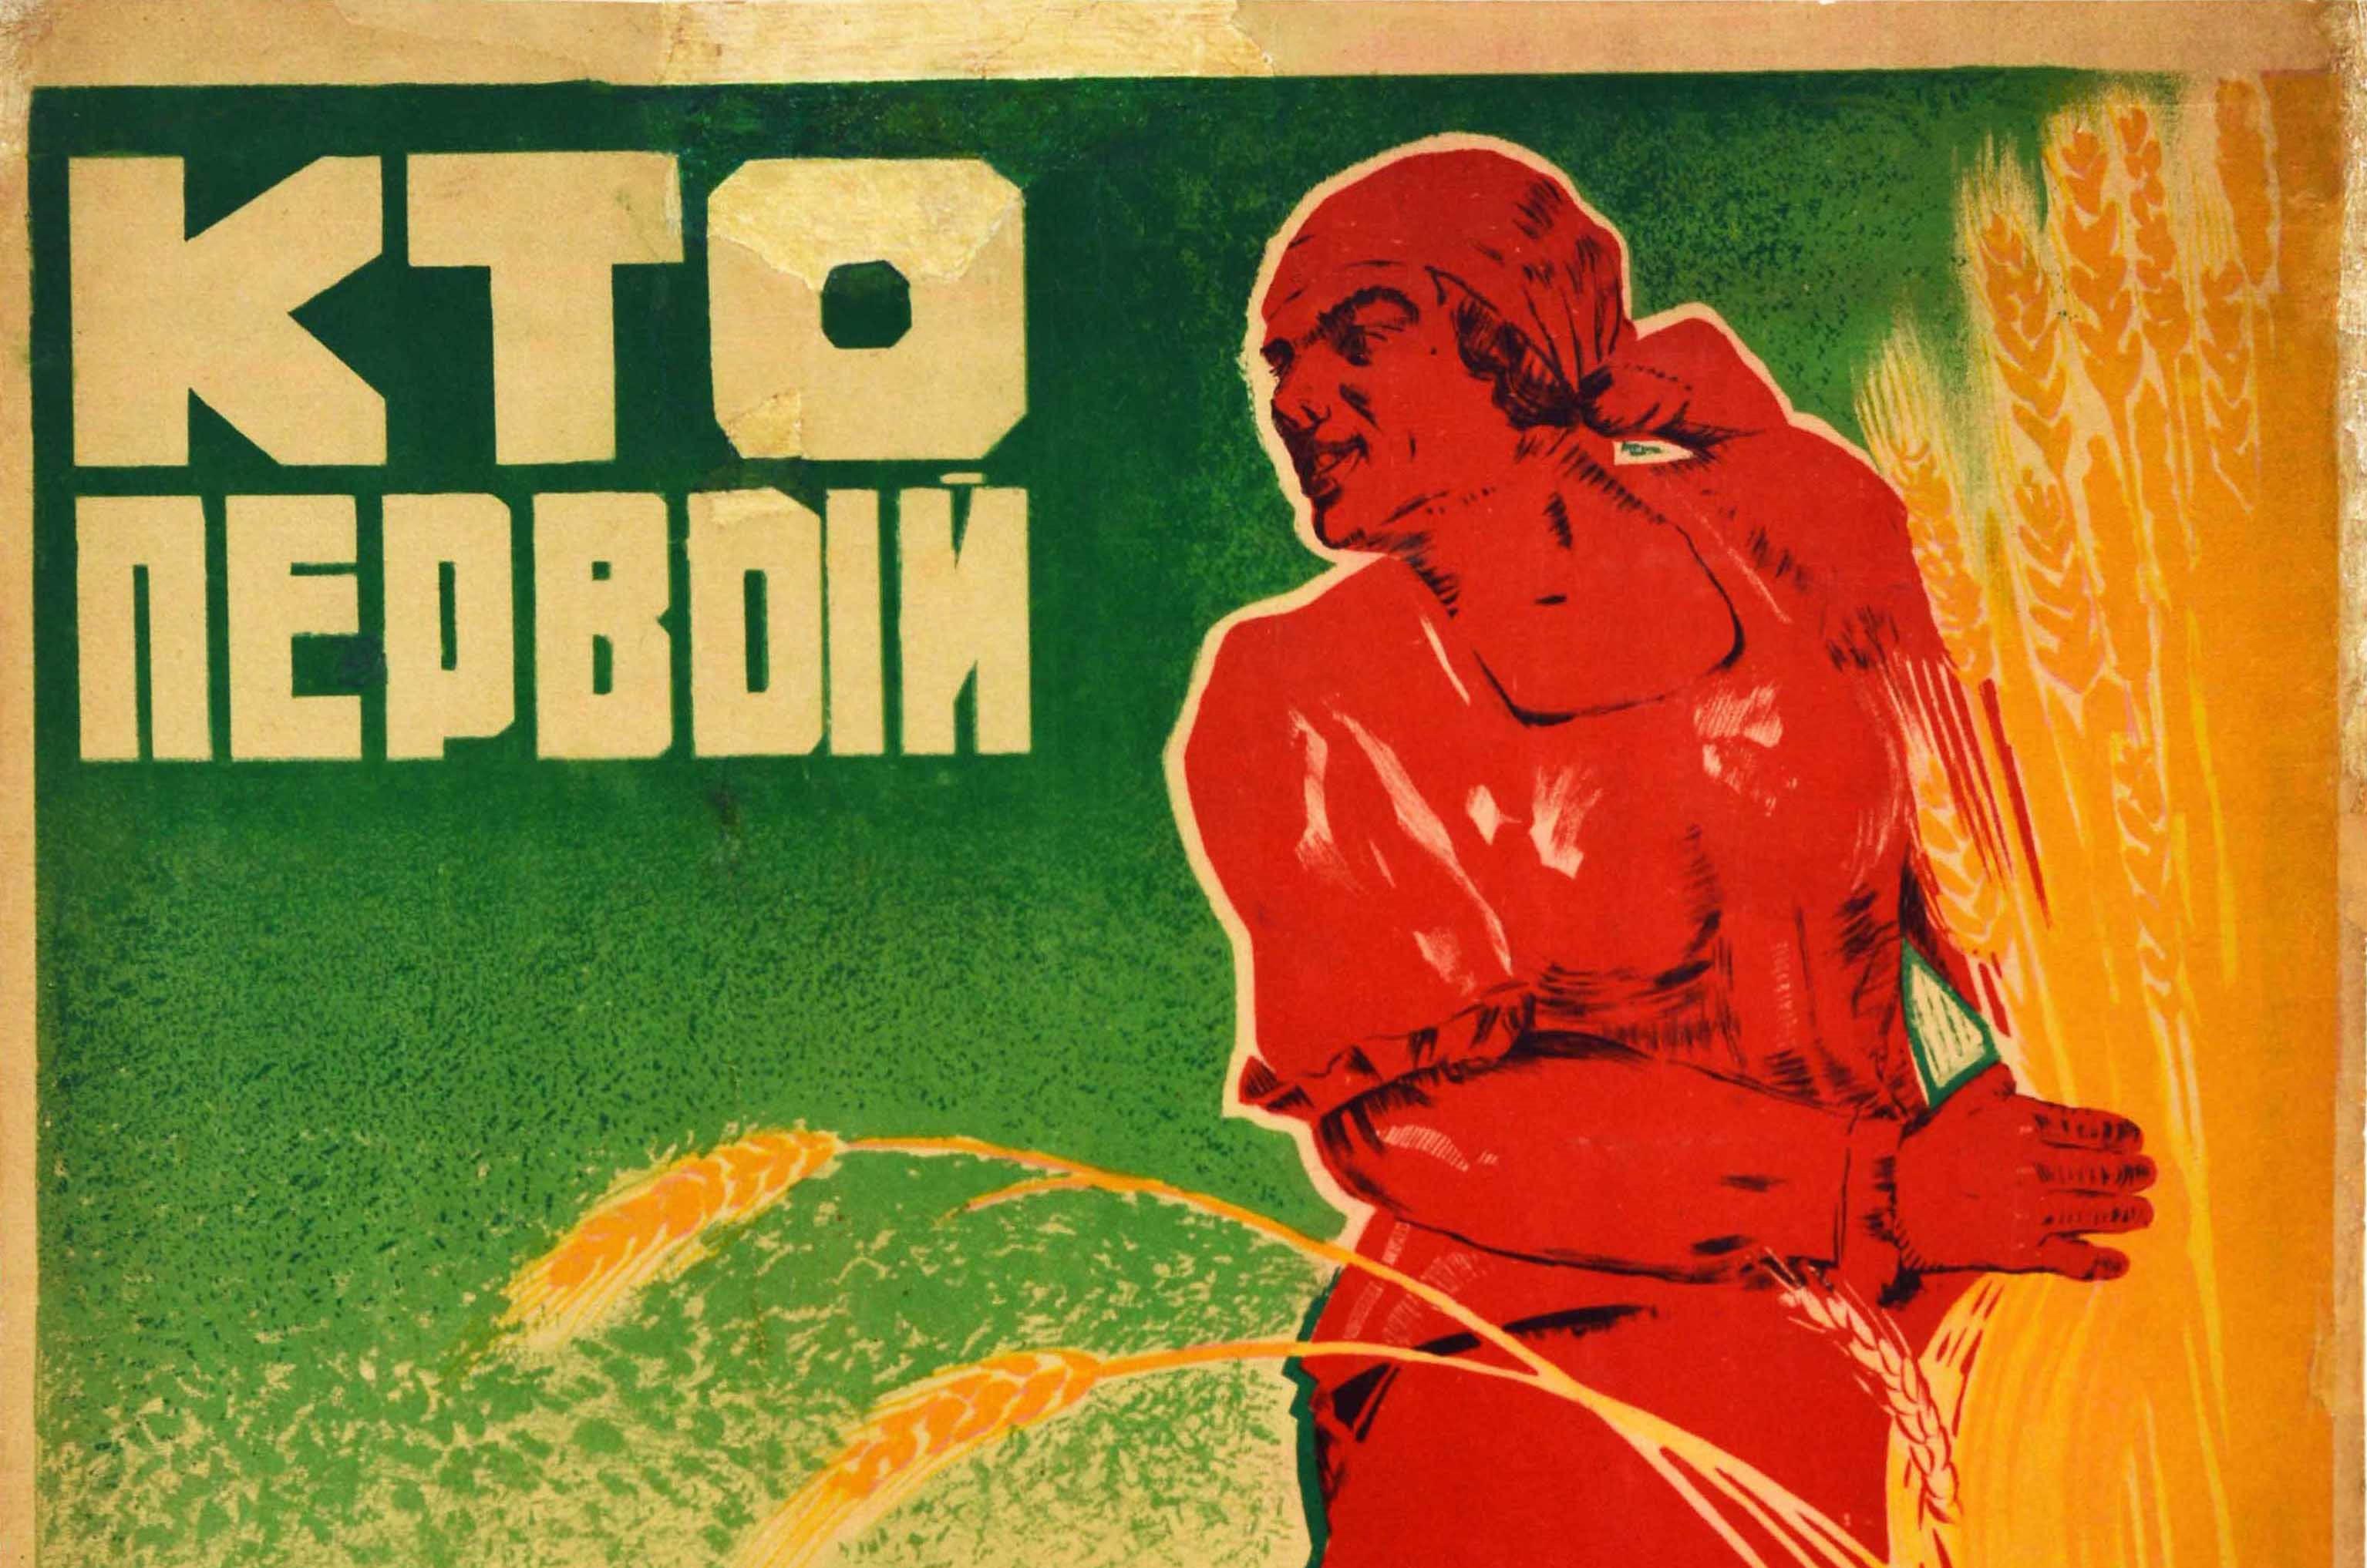 Original vintage Soviet propaganda poster - Who is first in collective work - featuring the bold text above and below an image of farm workers in a field against a green shaded background, a lady holding a sheaf of wheat in the foreground with a man